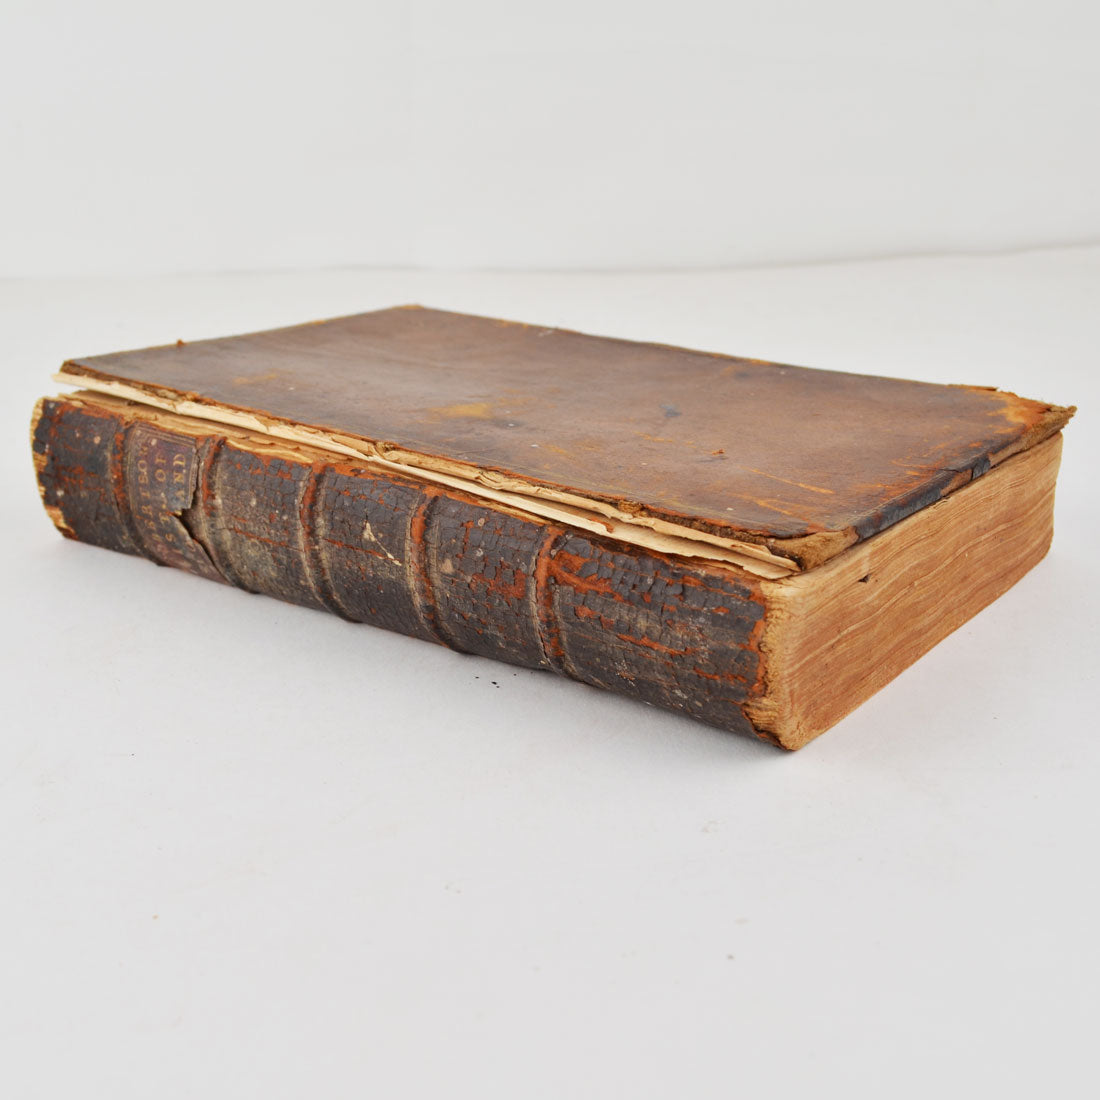 The History of Scotland by William Robertson - Vol II, 4th Edition - 1761